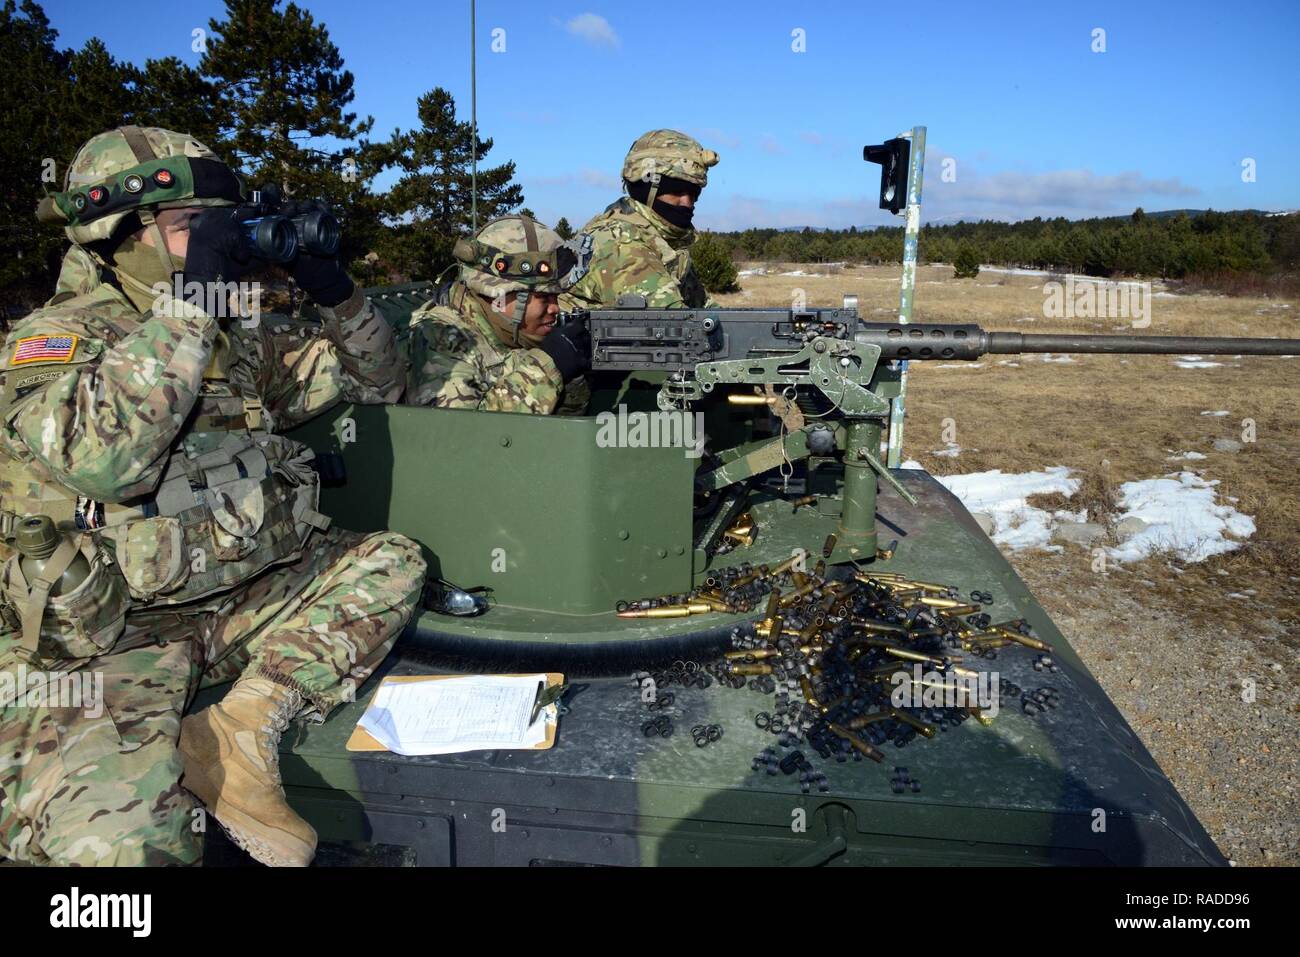 U.S. Army paratroopers from the 173rd Brigade Support Battalion, 173rd Airborne Brigade qualify with the .50-caliber machine gun during Exercise Lipizzaner III in Bac, Slovenia, on Jan. 25, 2017. Lipizzaner is a combined squad-level training exercise in preparation for platoon evaluation, and to validate battalion-level deployment procedures. Stock Photo